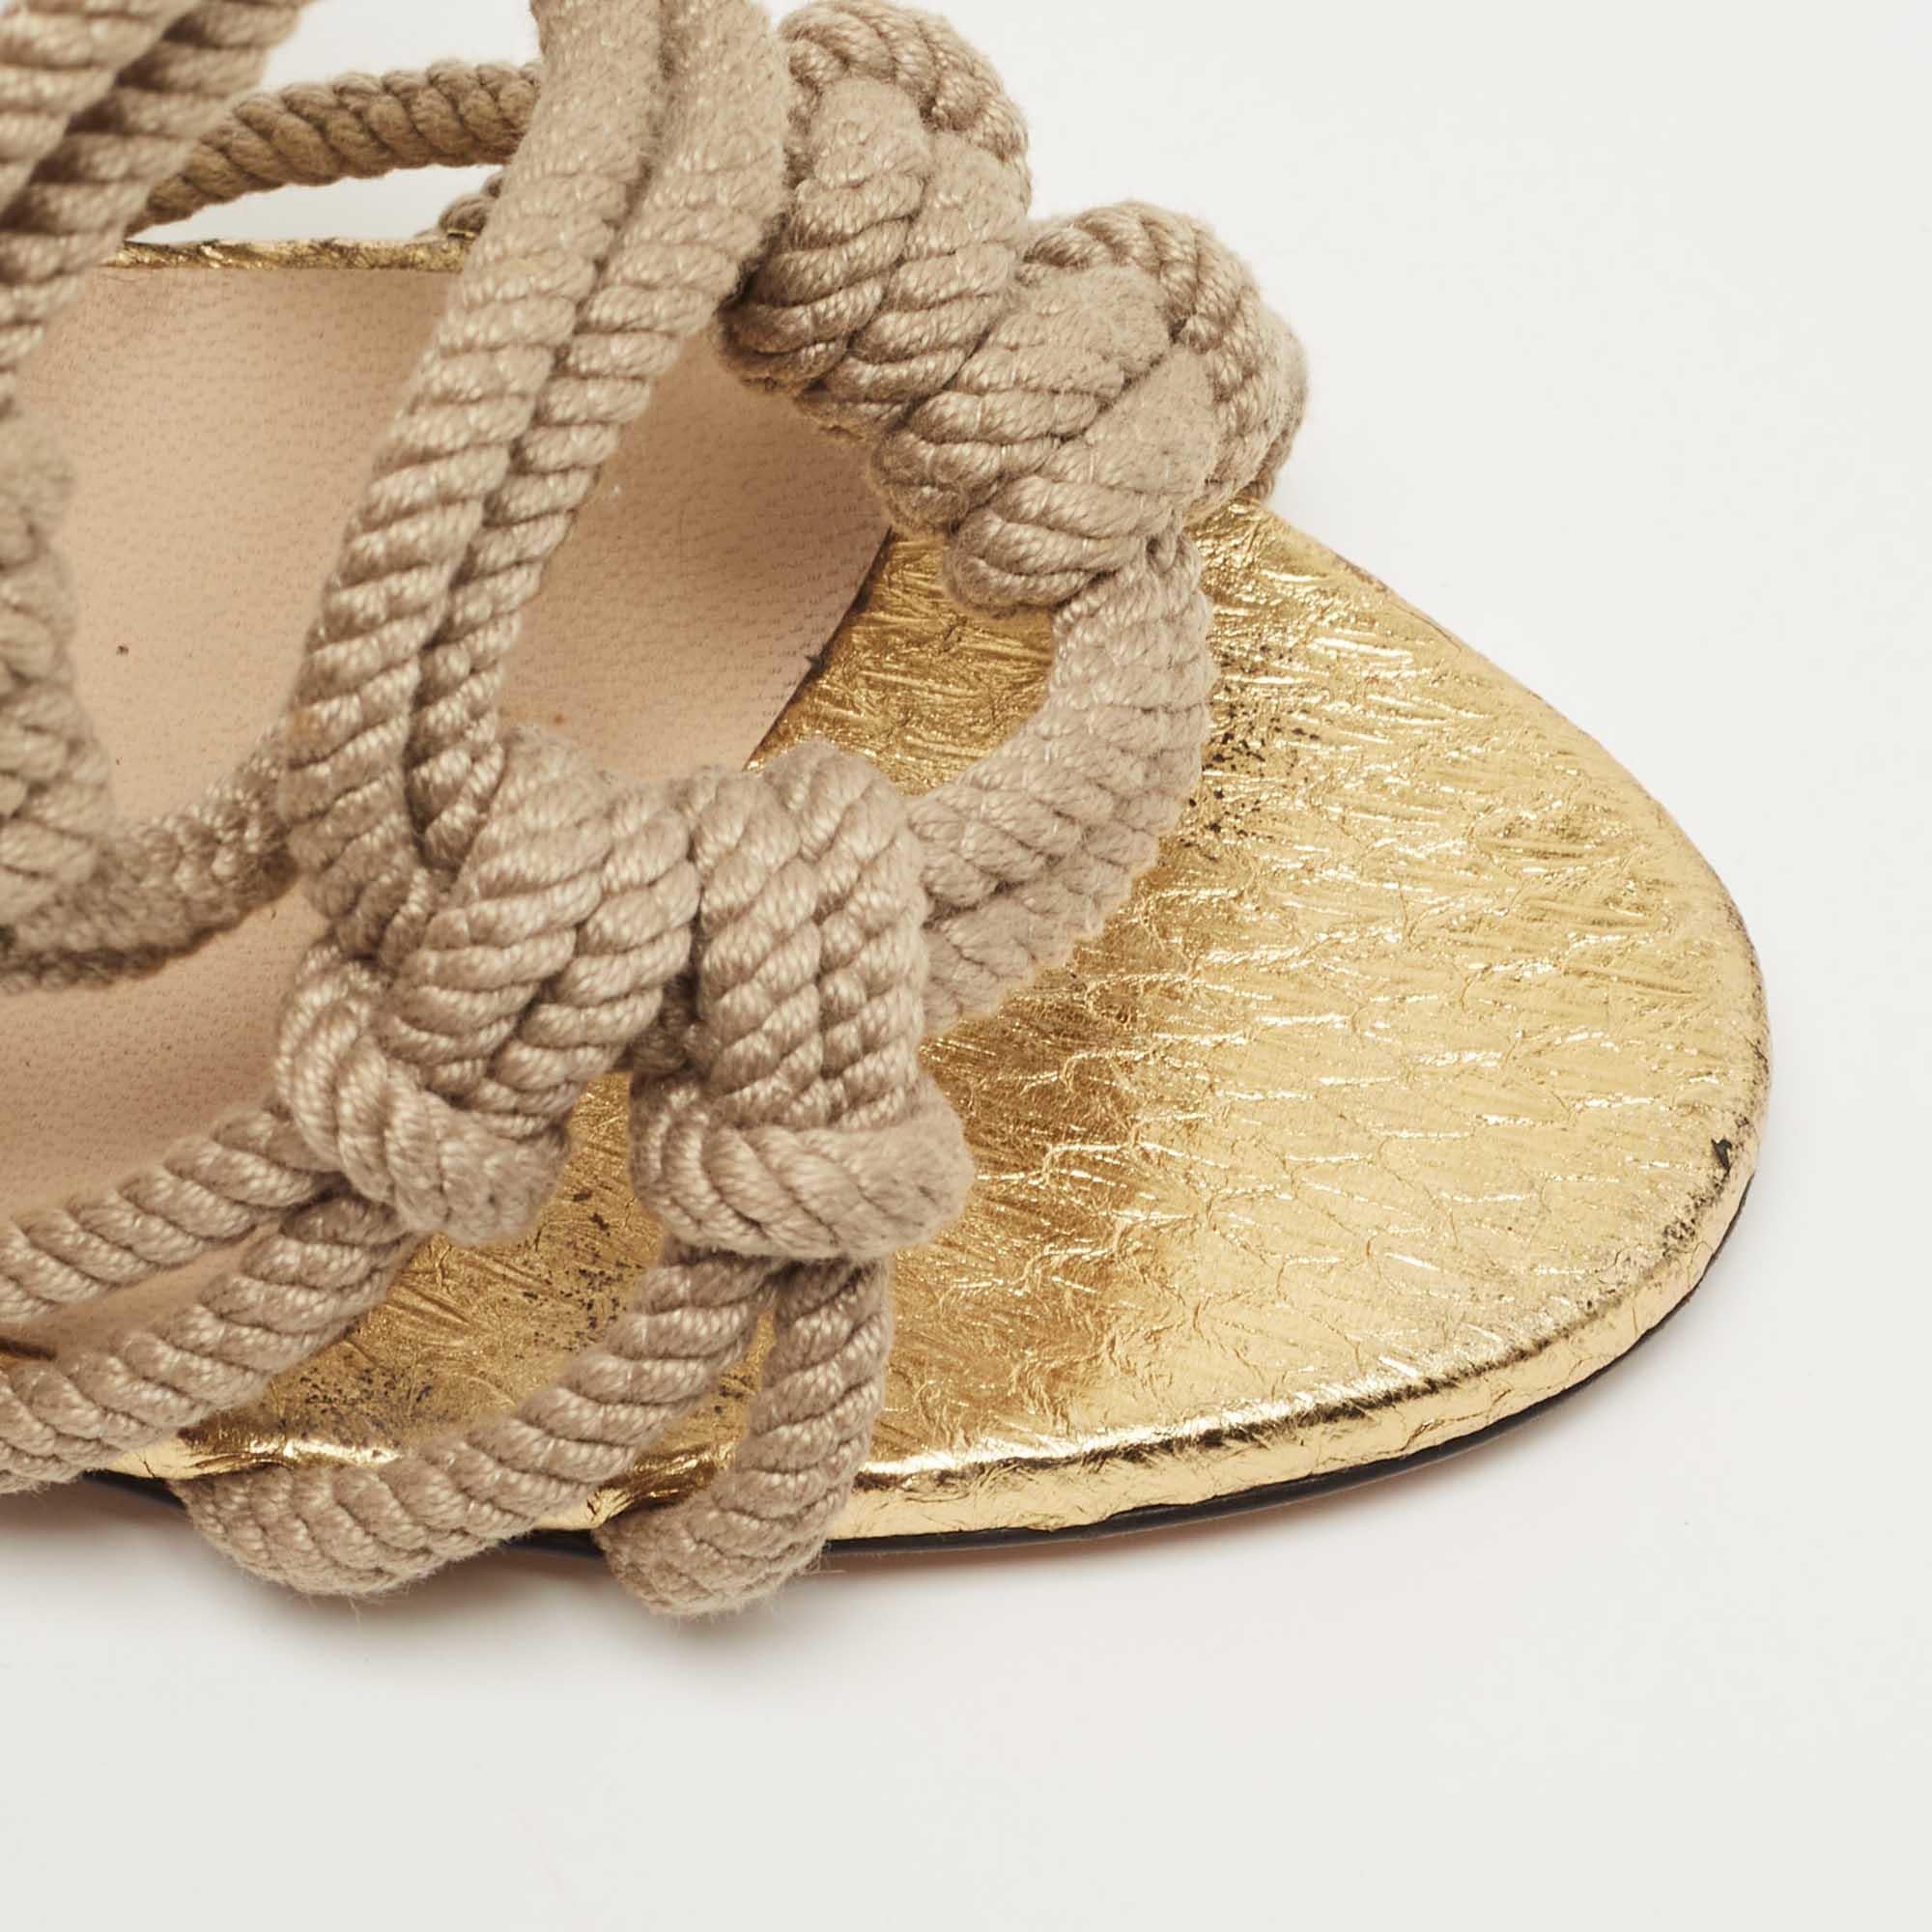 Jimmy Choo Beige/Gold Knotted Rope and Embossed Snakeskin Sandals Size 39 1